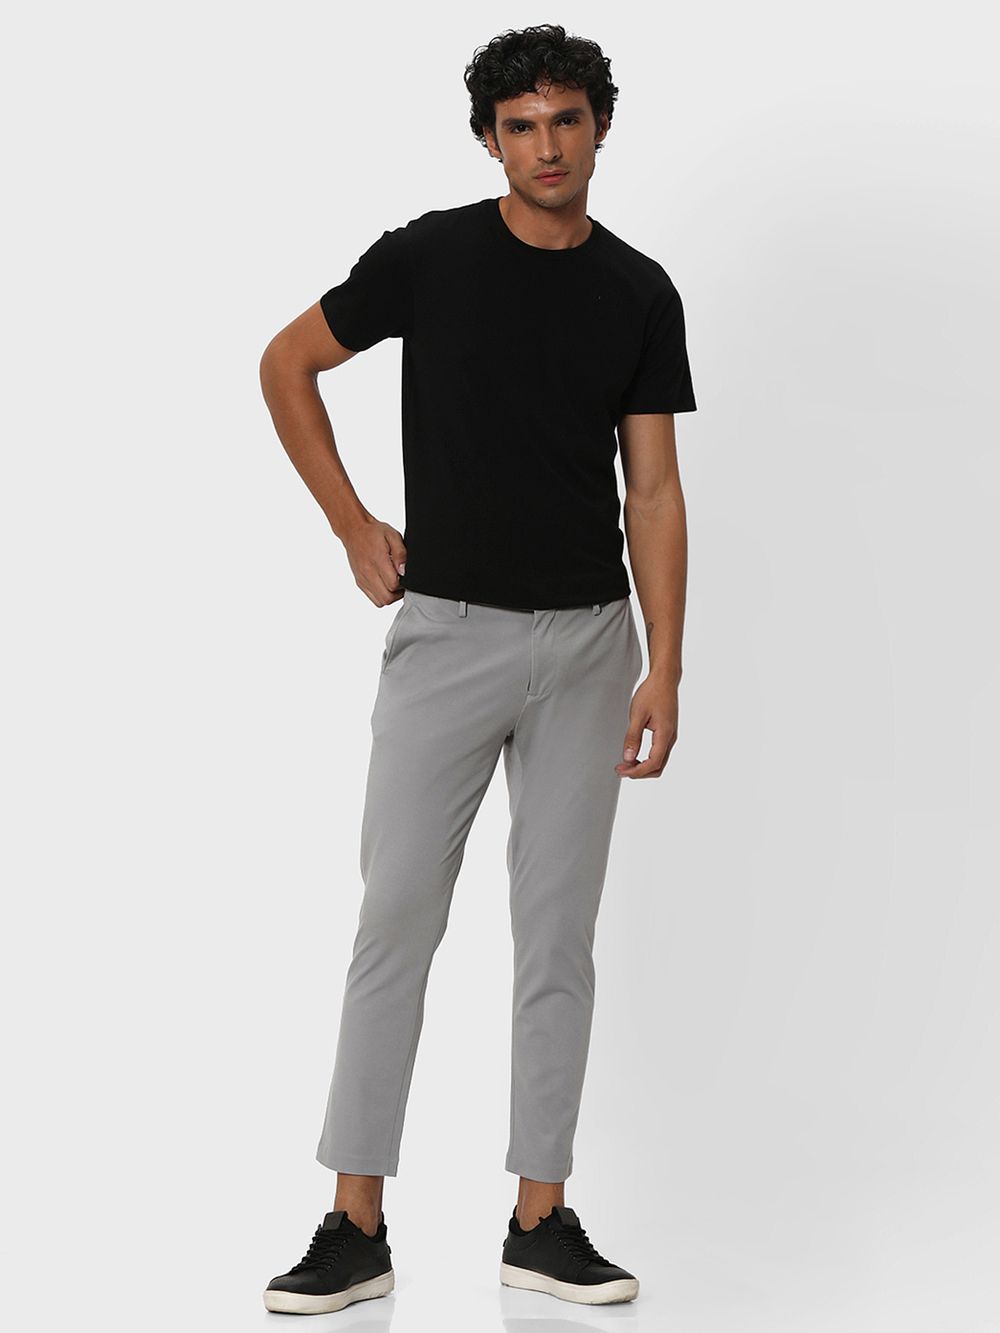 Grey Ankle Length Stretch Chinos Trouser